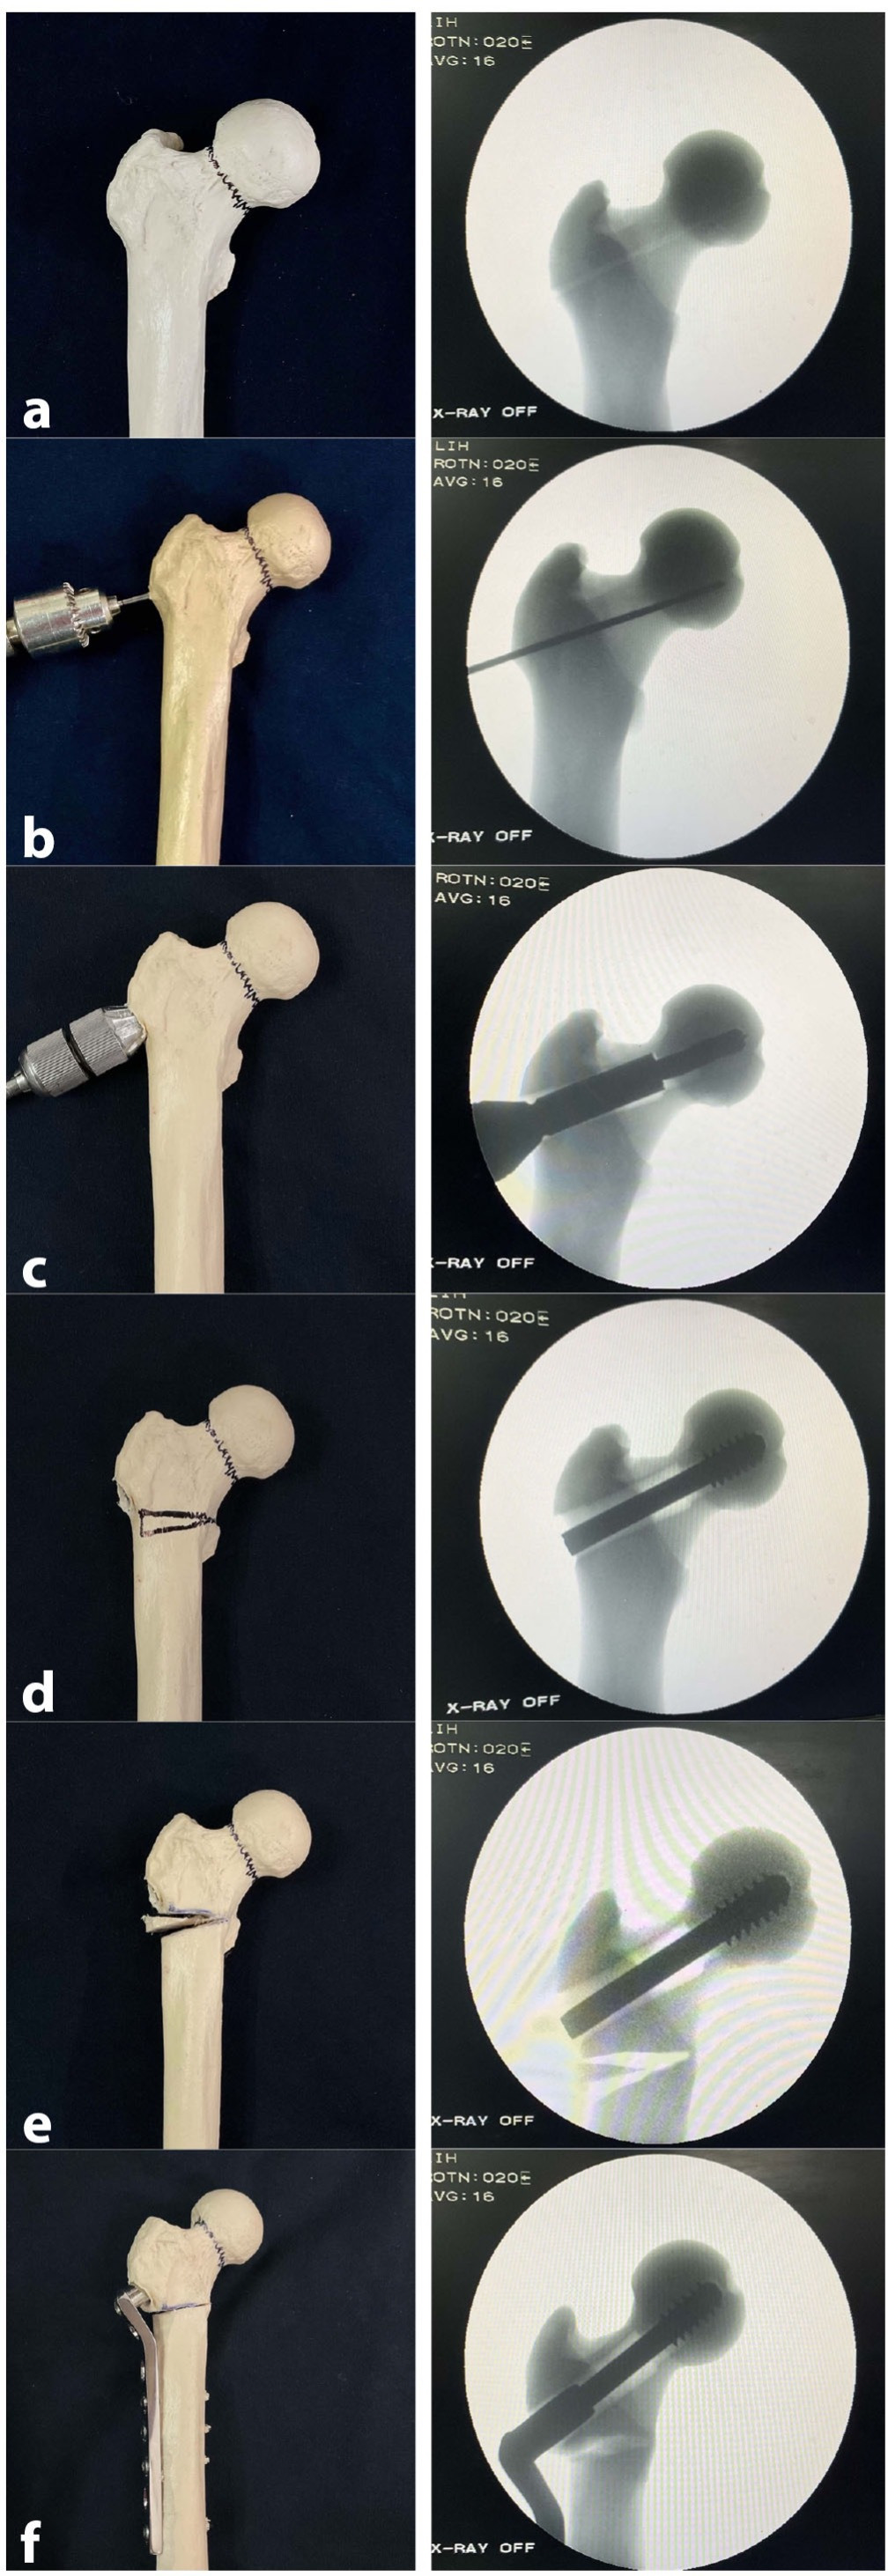 Fig. 3 
            Step-wise demonstration of intraoperative technique of valgus hip osteotomy and operative fixation (saw bone model). a) The subcapital fracture is anatomically reduced. b) The pin insertion angle (PIA) is calculated. The PIA is 120° (dynamic hip screw (DHS) barrel angle) – calculated correction angle (CCA). This will allow the DHS plate to sit flush with the lateral femoral cortex after the osteotomy is made. c) A guidewire is placed into the femoral head at the PIA and then prepared for insertion of the lag screw using the DHS Triple Reamer. d) The lag screw is inserted to within 2 to 4 mm of the subchondral plate, confirmed in orthogonal views. e) A transverse osteotomy cut is made at the level of lesser trochanter (but not through the medial cortex). The second oblique cut is made to equal the CCA. We emphasize that the saw cuts do not violate the medial femoral cortex. f) The lateral plate is connected to the lag screw and the osteotomy is closed with an audible snap. Cortical transverse screws are placed in compression mode to compress the osteotomy site. Finally, a compression screw is placed in the lag screw to compress the neck fracture.
          